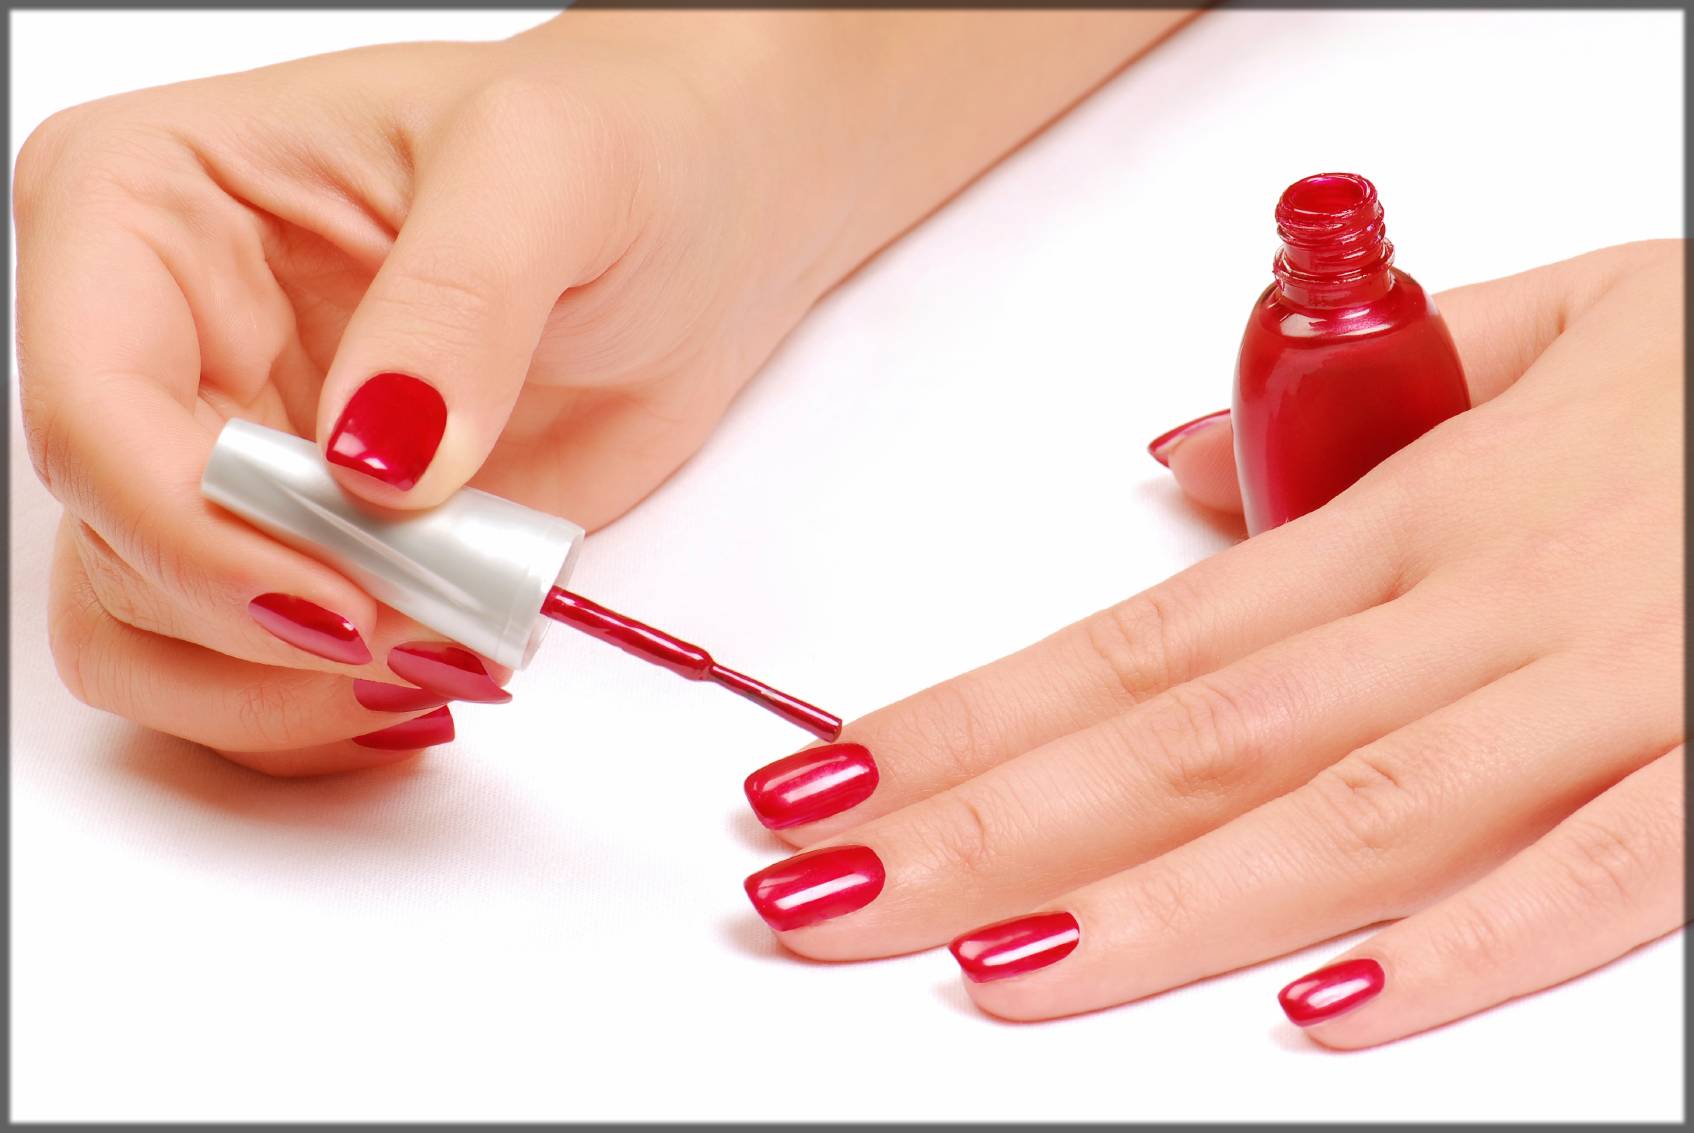 decorate hands after skin whitening manicure